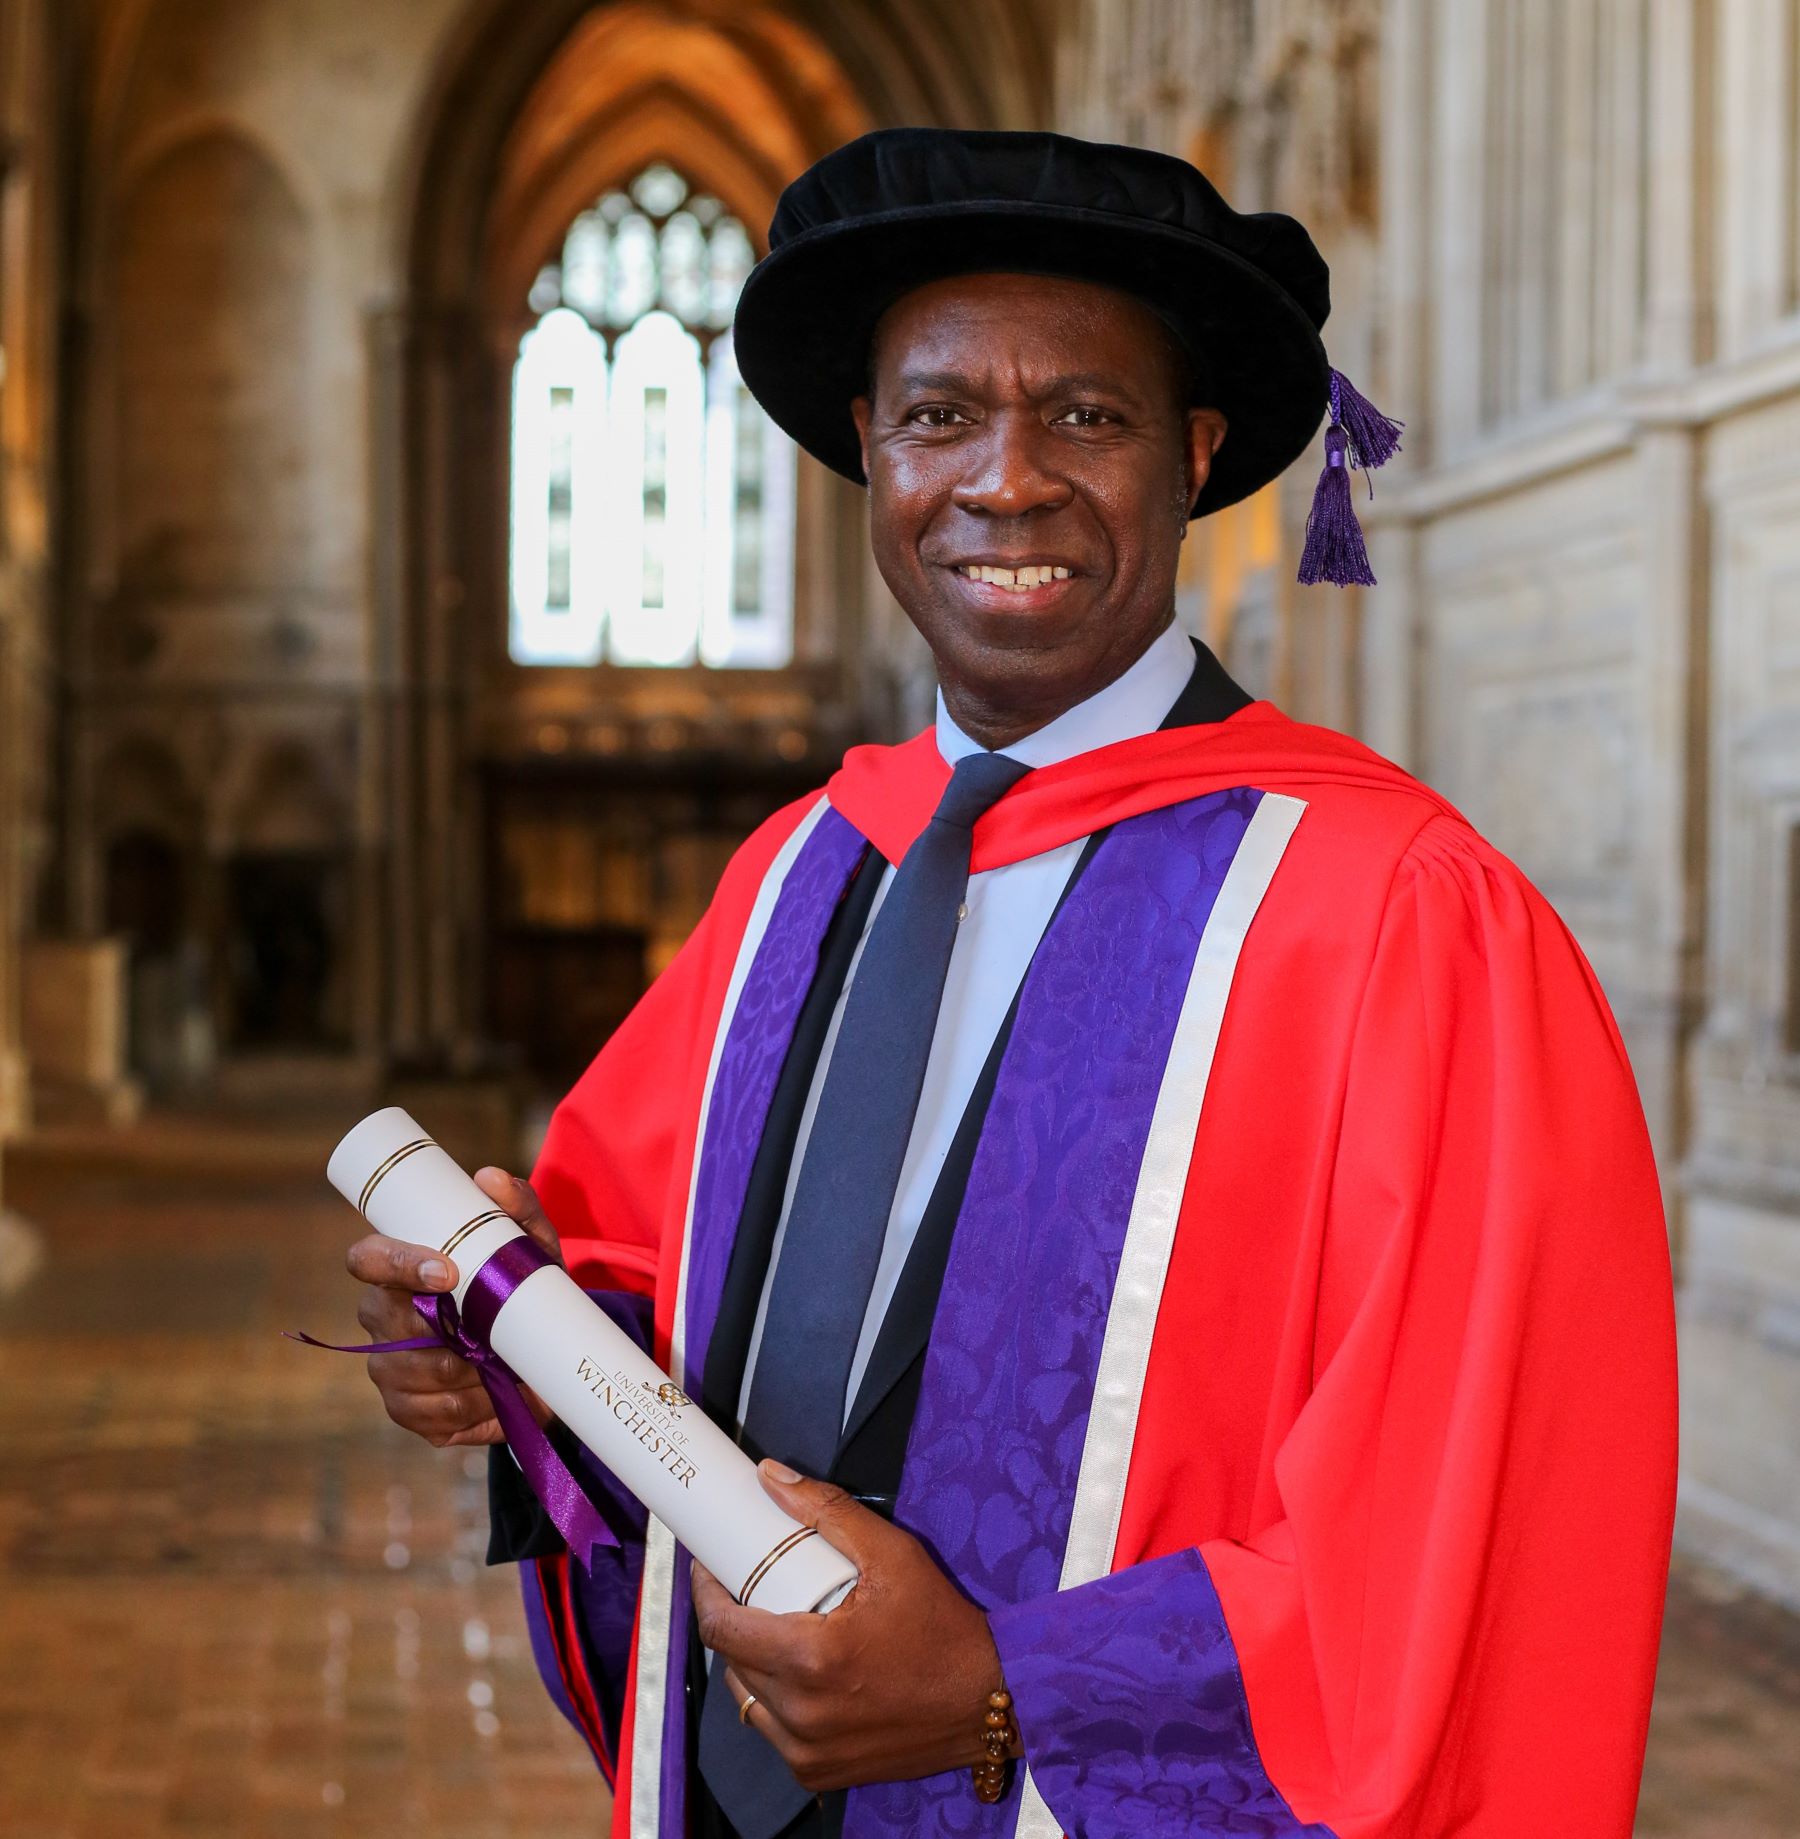 Clive Myrie in graduation robes